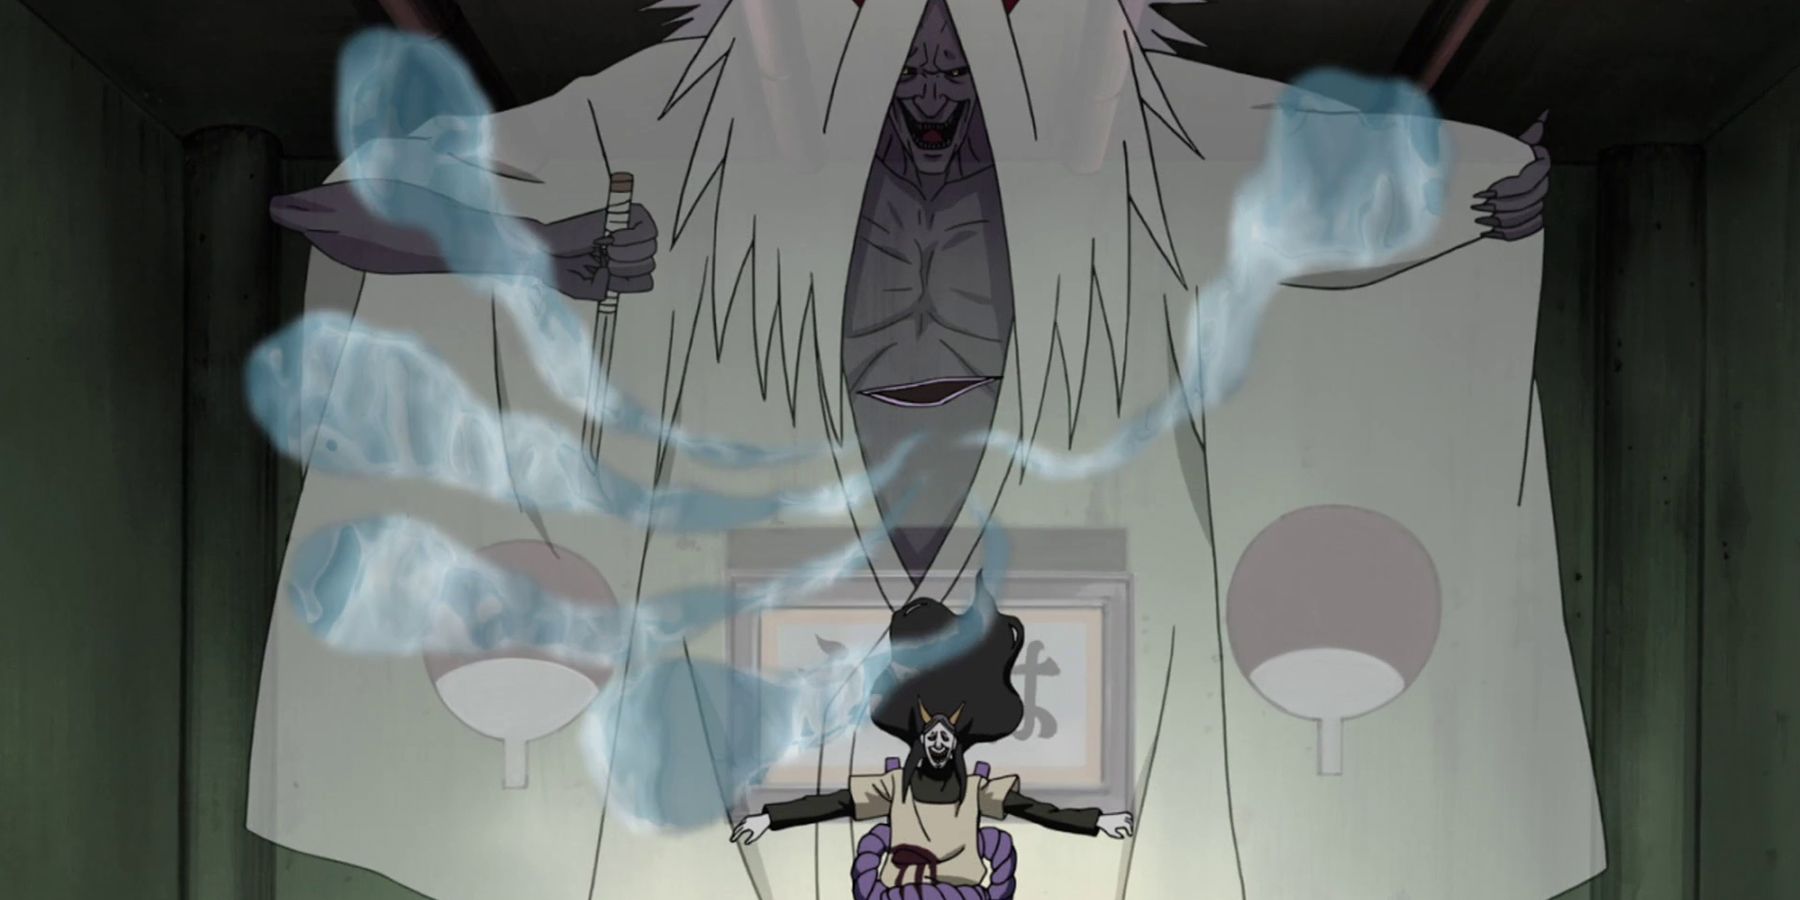 The Shinigami harvesting souls next to Orochimaru during the events of Naruto: Shippuden